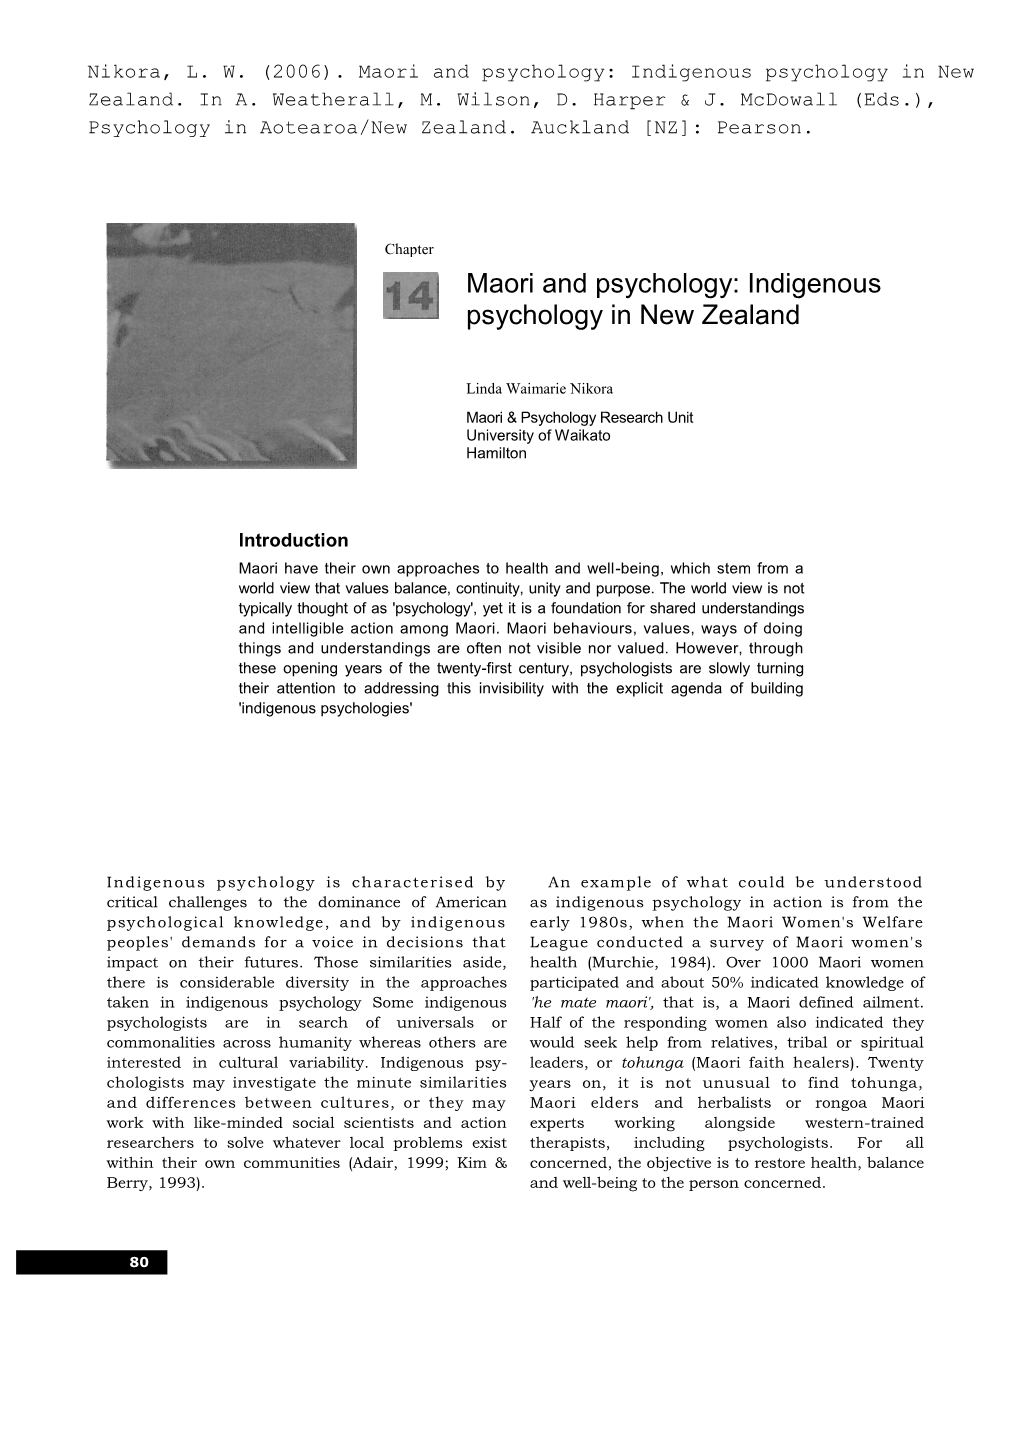 Indigenous Psychology in New Zealand